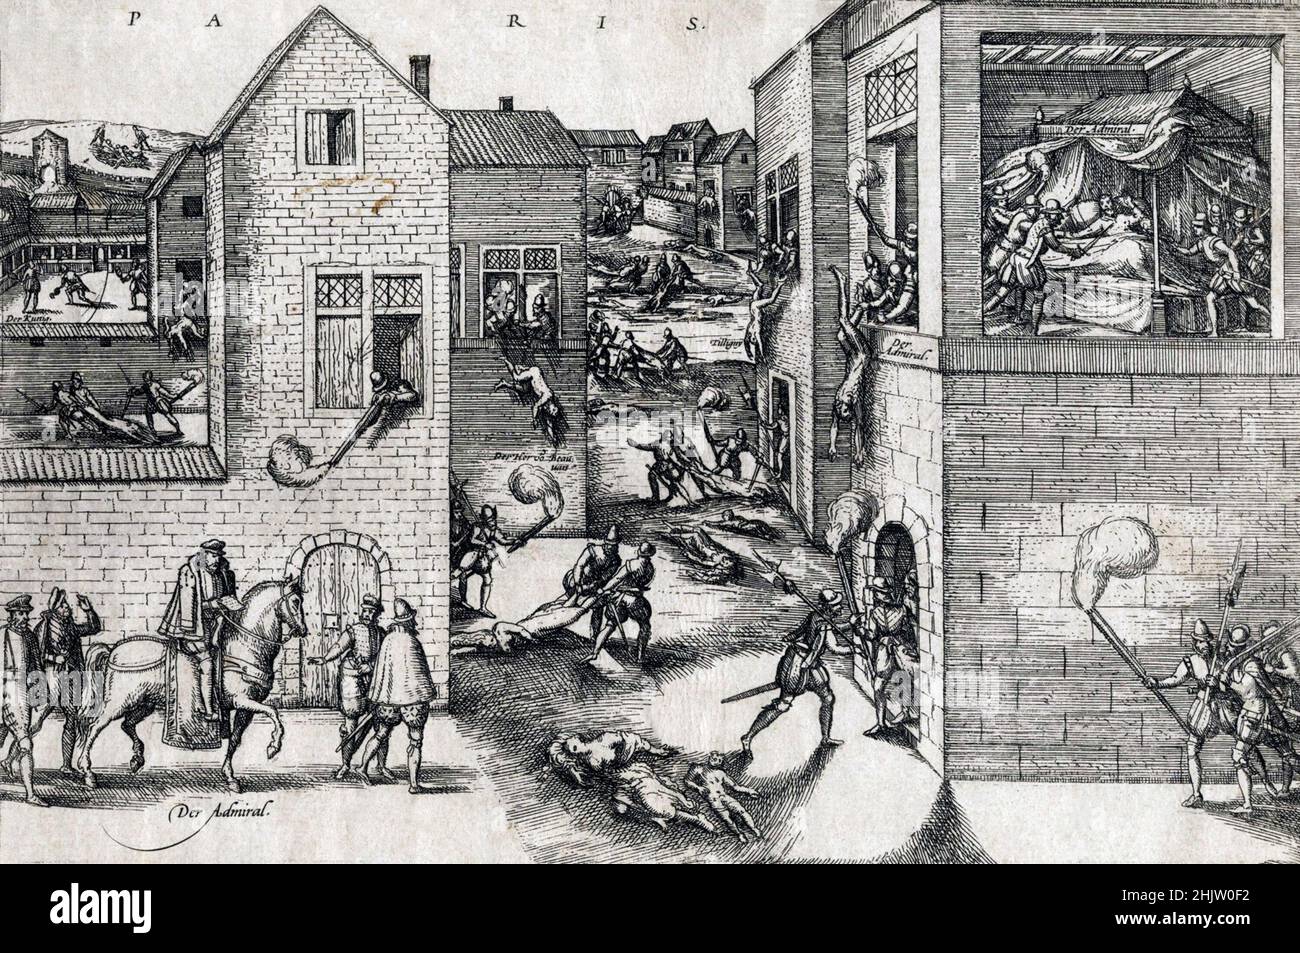 The St Bartholomew's Day massacre (Massacre de la Saint-Barthélemy) in 1572. In the religious war between the royalist Catholics and the Huguenots (French Calvinist Protestants. Over a period of several weeks the mob violence left betweem 50000 and 30,000 protestants dead. In this image Admiral Gaspard de Coligny, the leader of the Huguenots, appears twice. On the left is his attempted assassination and on the right of centre his body is hanging from a window after his killing by the catholic mob. Stock Photo